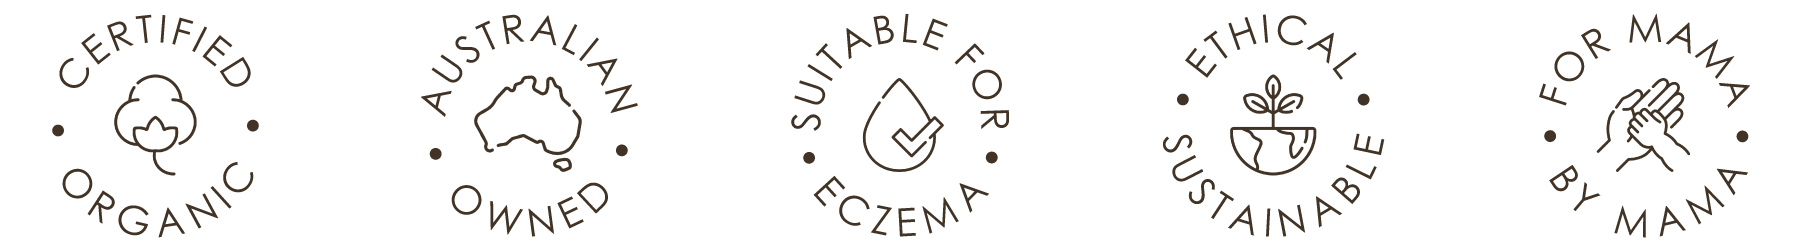 Icons of Certified Organic, Australian Owned, Suitable for Eczema, Ethical & Sustainable, For Mama – By Mama